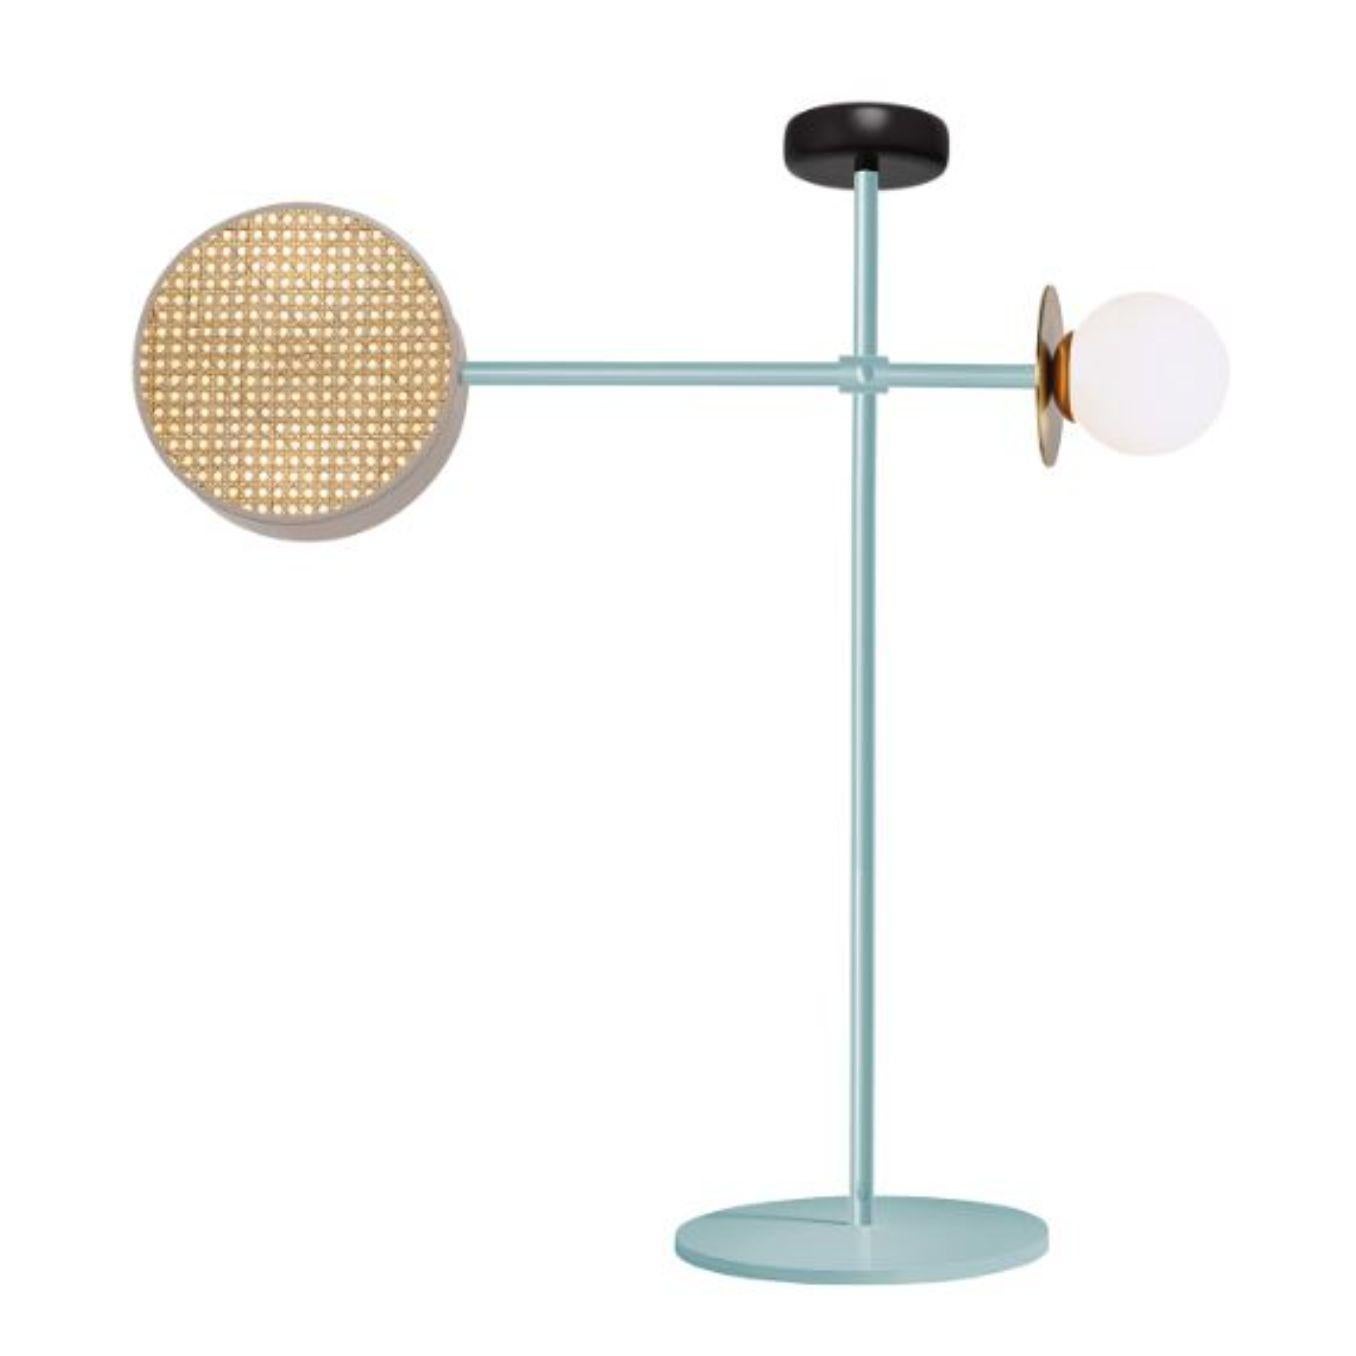 Monaco floor lamp by Dooq
Dimensions: W 110 x D 40 x H 169 cm
Materials: lacquered metal, brass/nickel, rattan and wood spheres.

Information:
230V/50Hz
3 x max. G9
4W LED

120V/60Hz
3 x max. G9
4W LED

Cable: 59”/1,5m

All our lamps